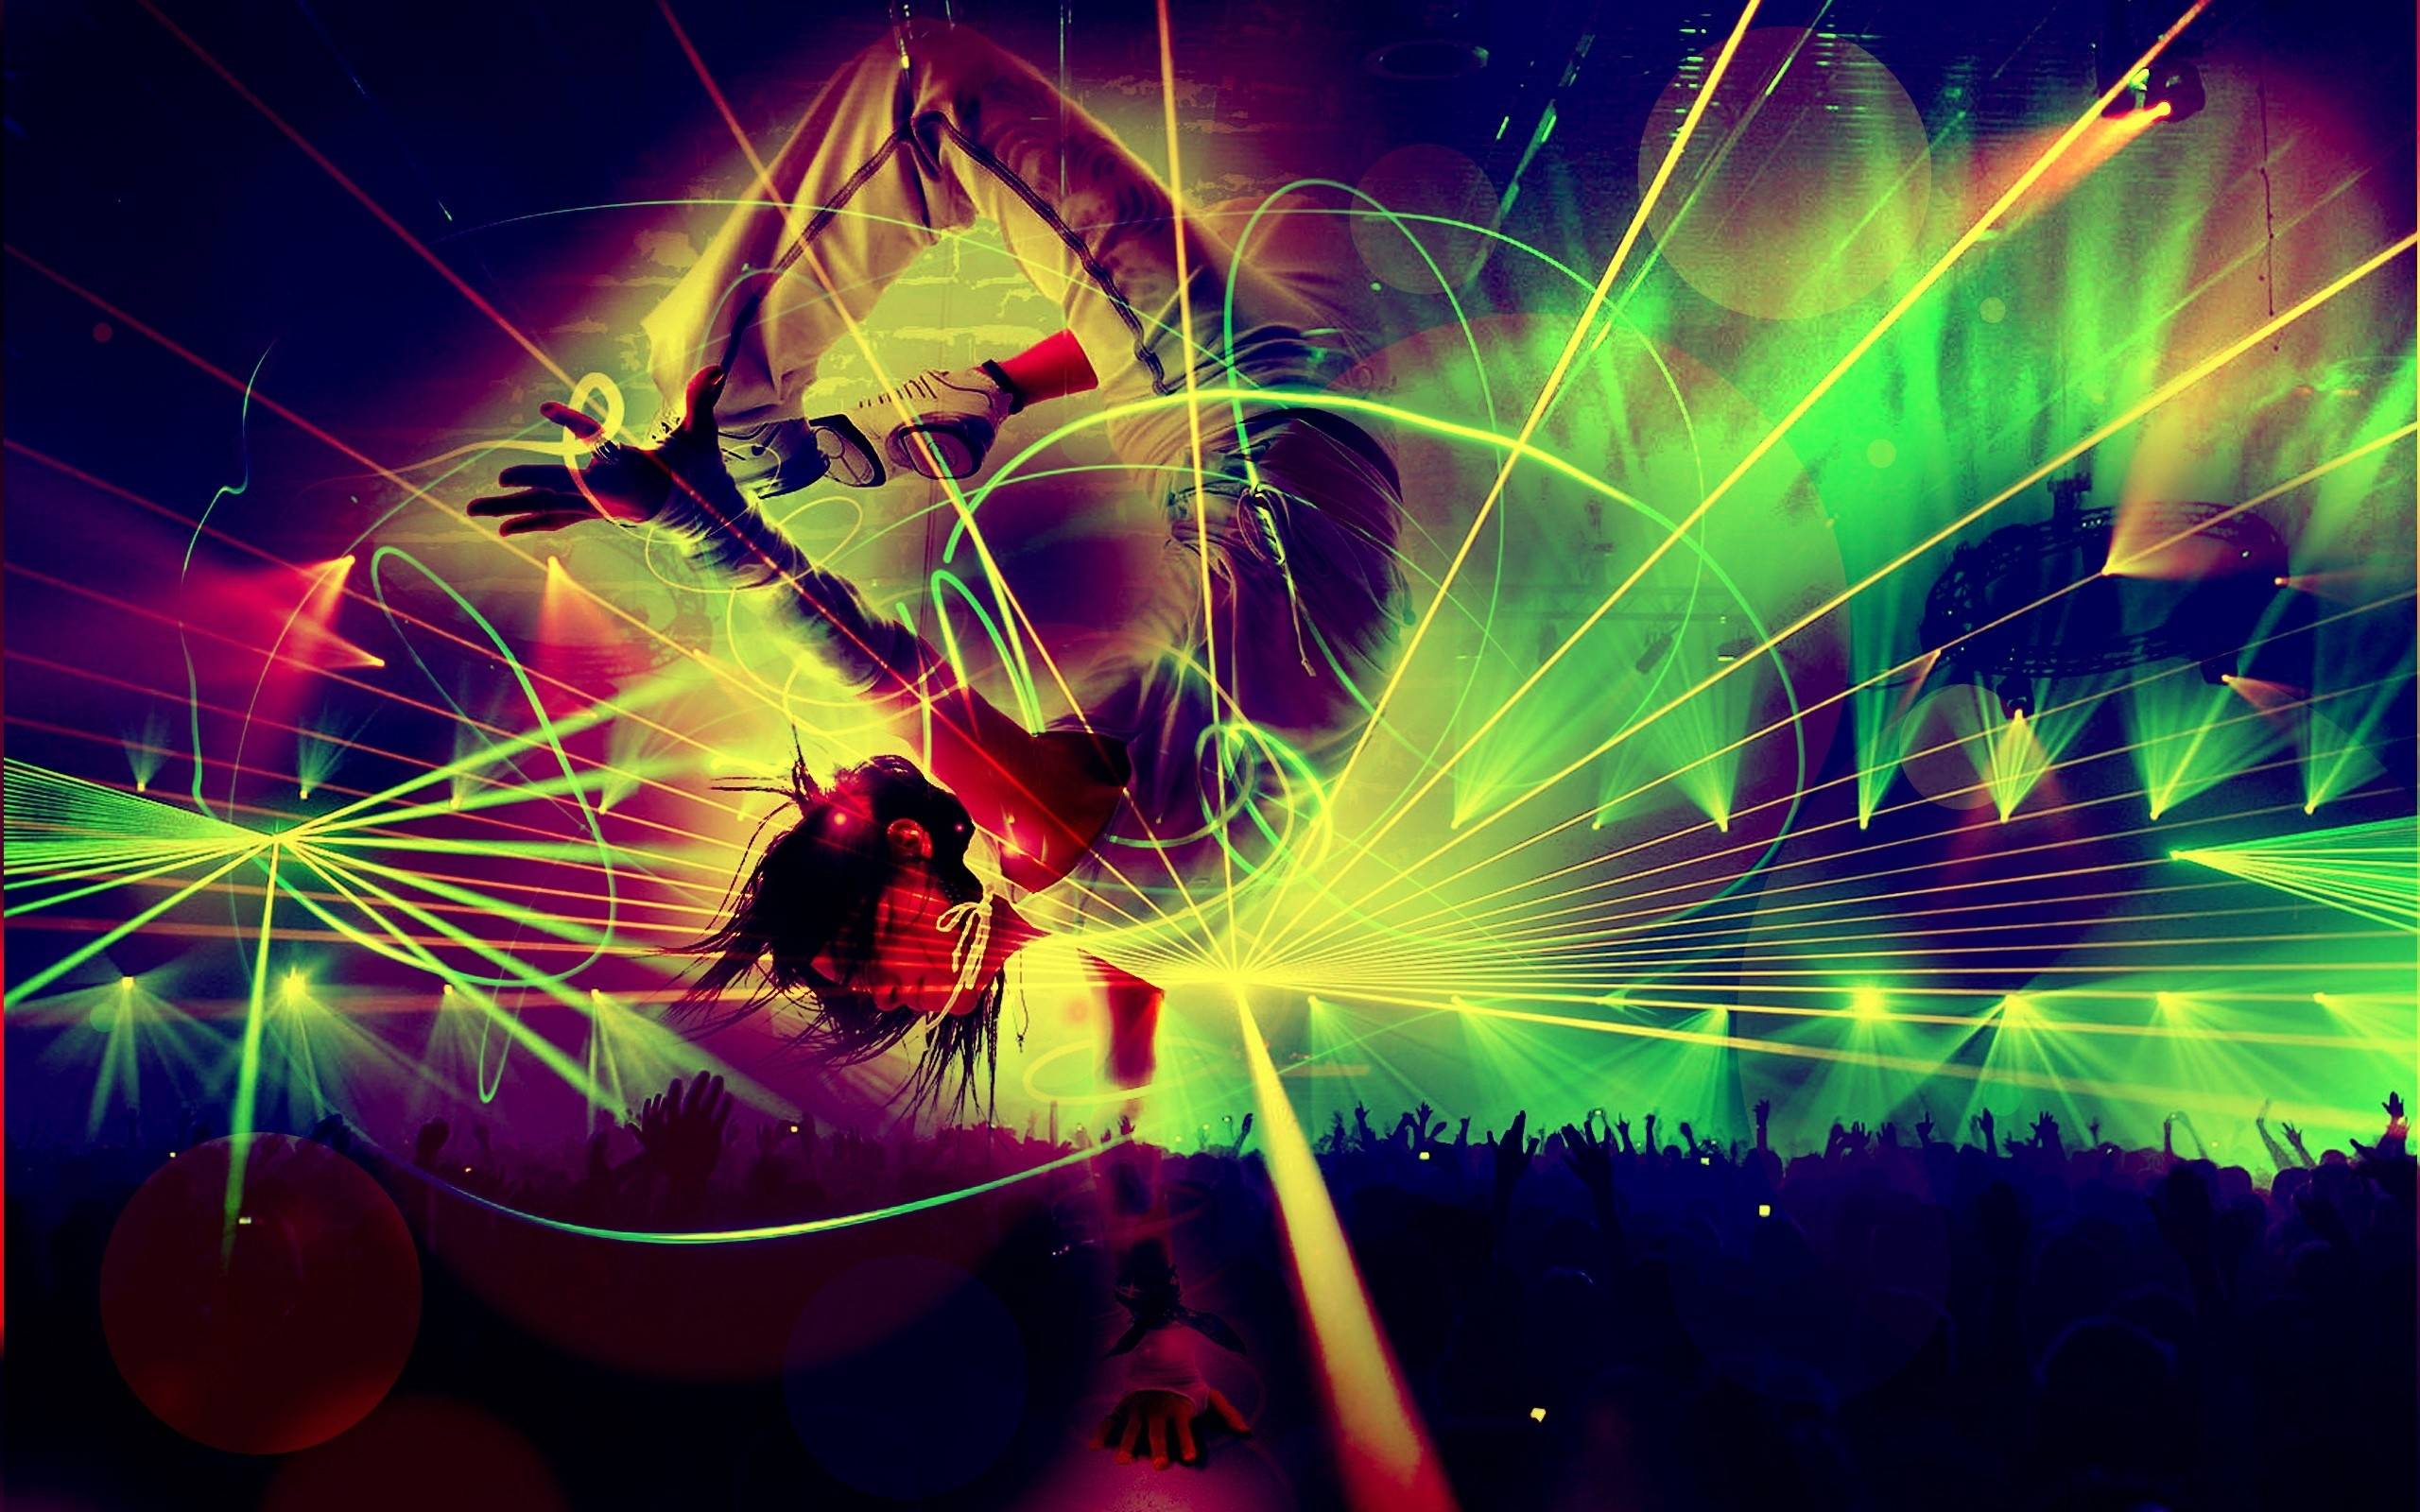 Wallpaper ID: 229644 / concert laser party and rave hd 4k wallpaper free  download